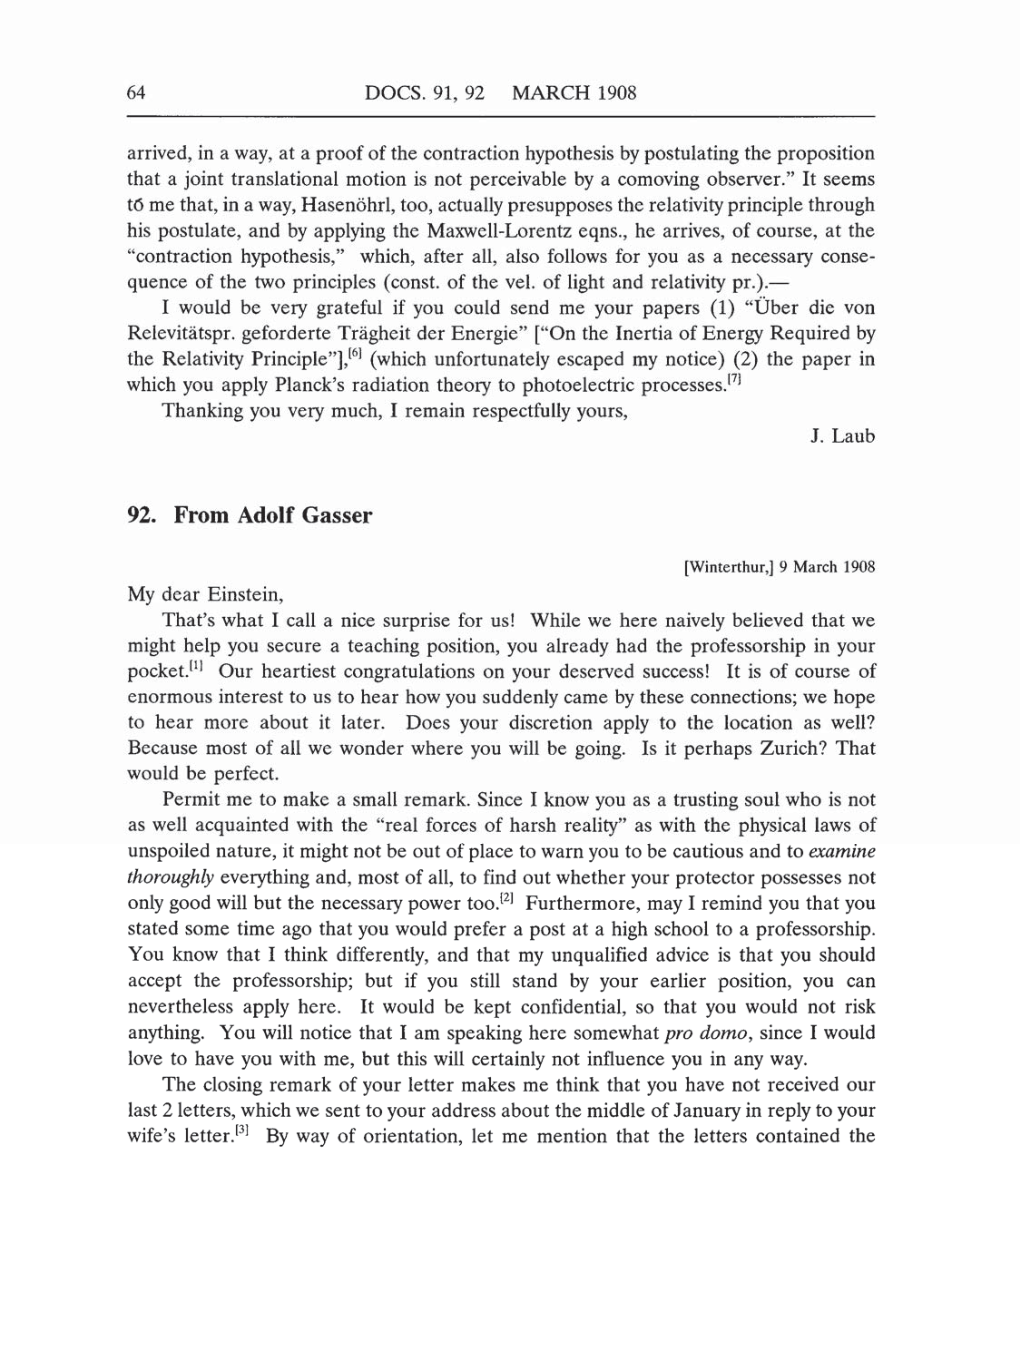 Volume 5: The Swiss Years: Correspondence, 1902-1914 (English translation supplement) page 64